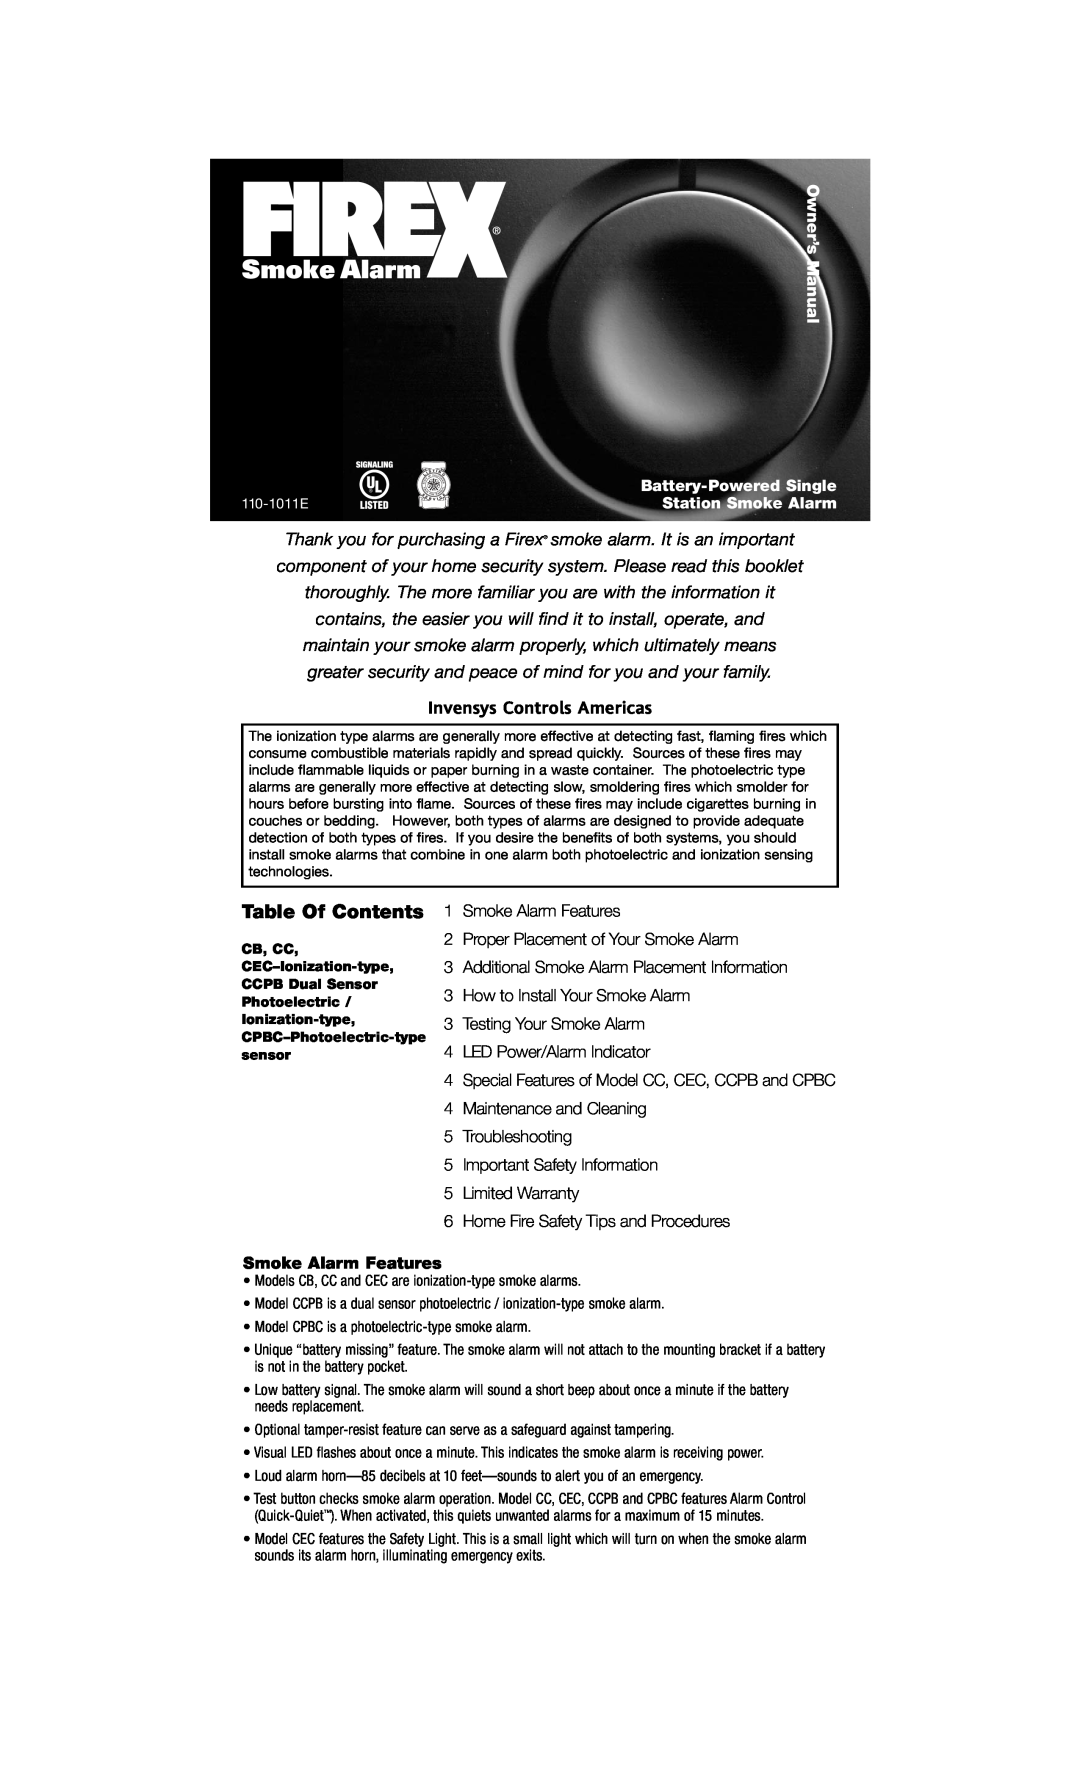 Firex 110-1011E owner manual Invensys Controls Americas, Smoke Alarm Features, Table Of Contents, Owner’s Manual 